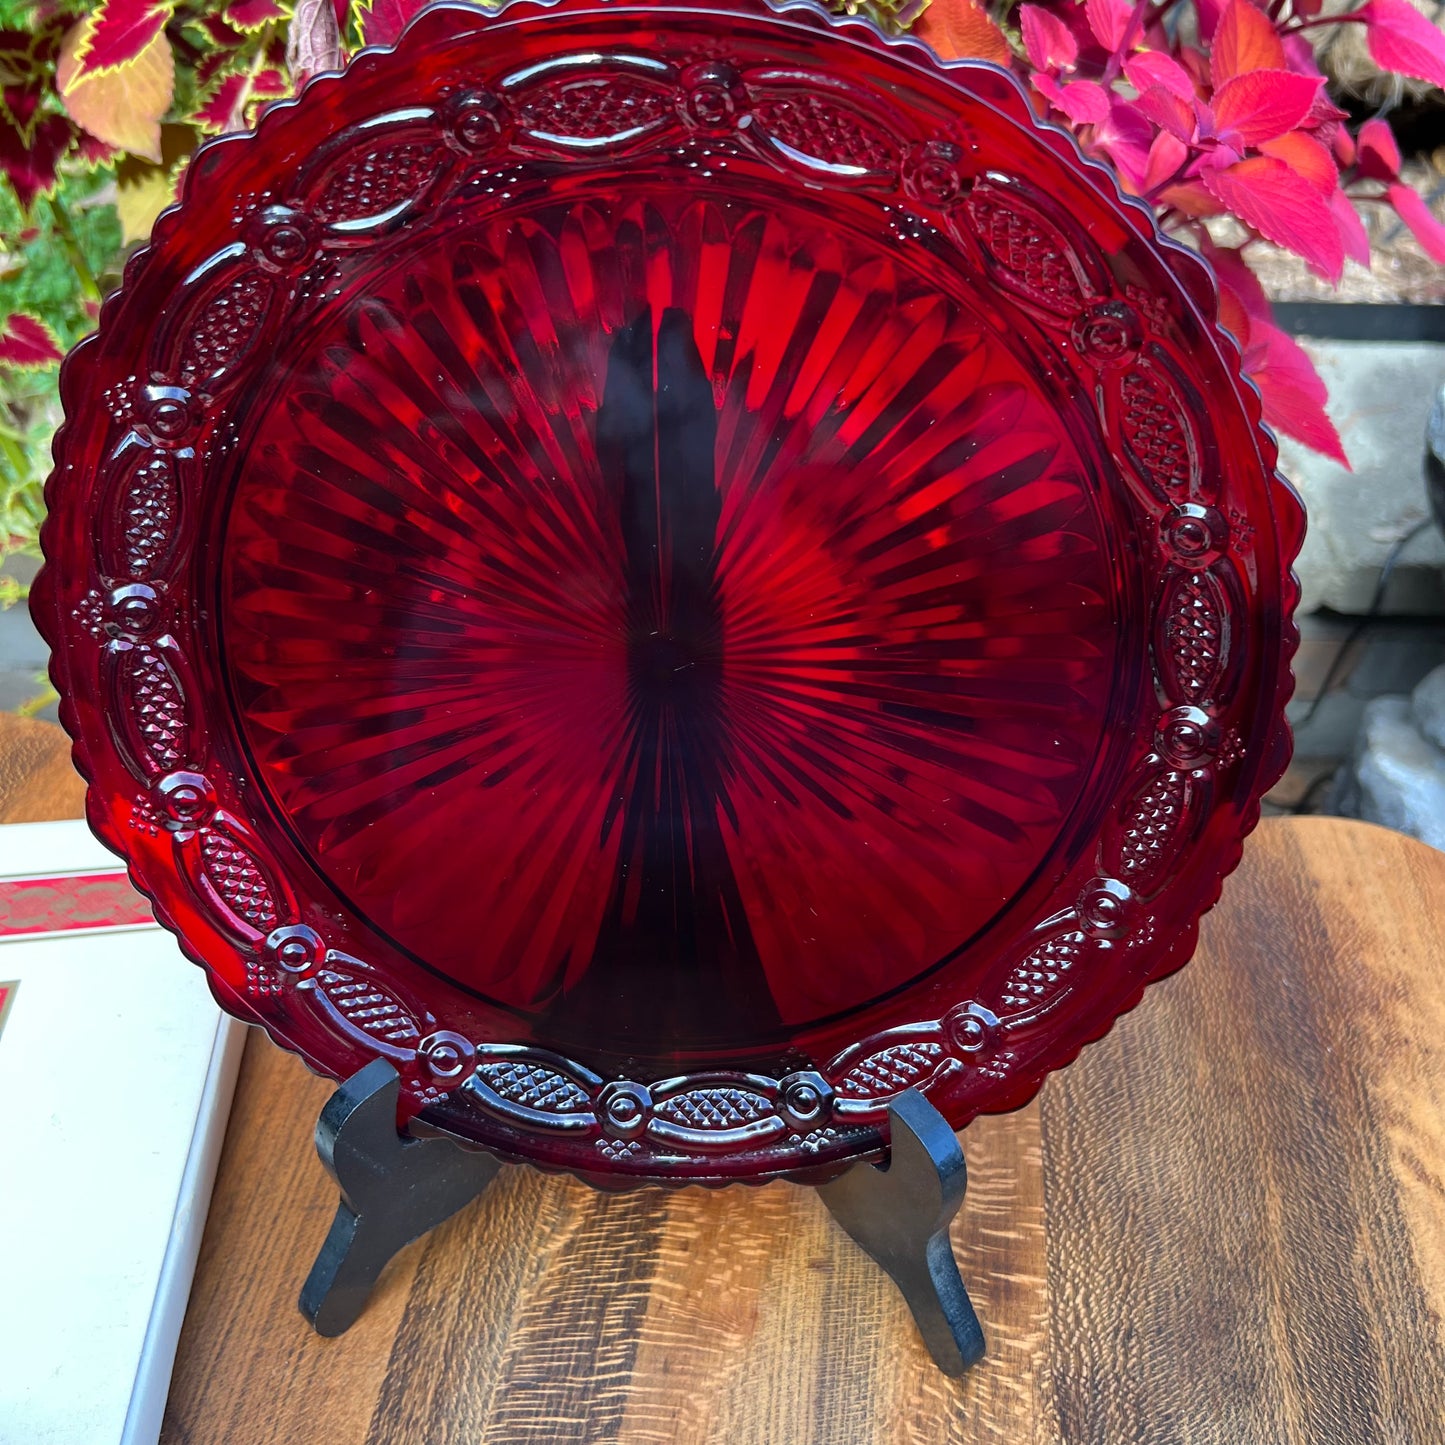 One Vintage Avon Ruby Red Cape Cod 1876 Dinner Plate & 2 Dessert Plates Orig Boxes